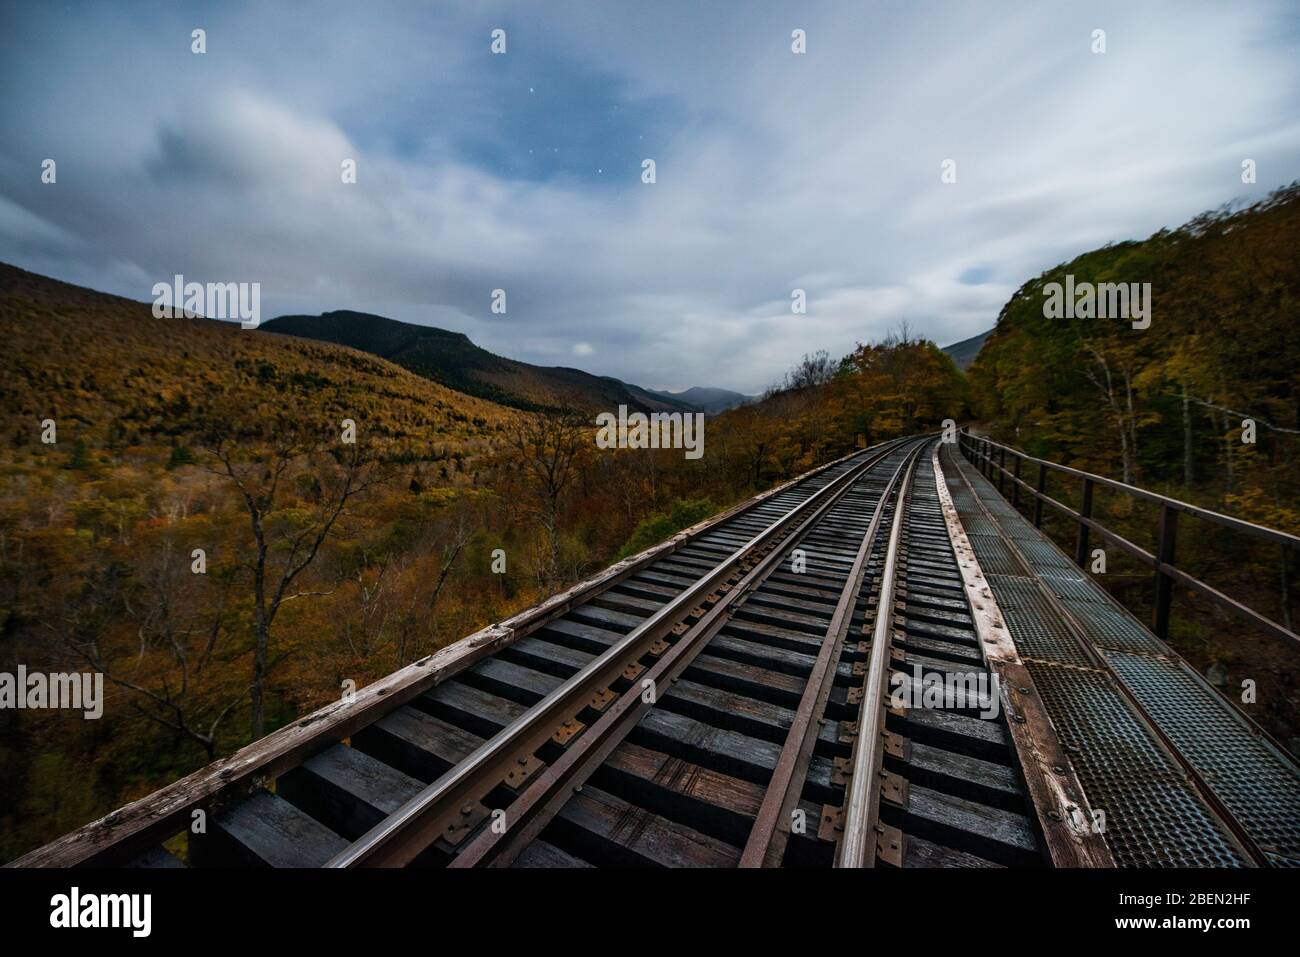 Abandoned Railroad Trestle high above New england autumn forest Stock Photo